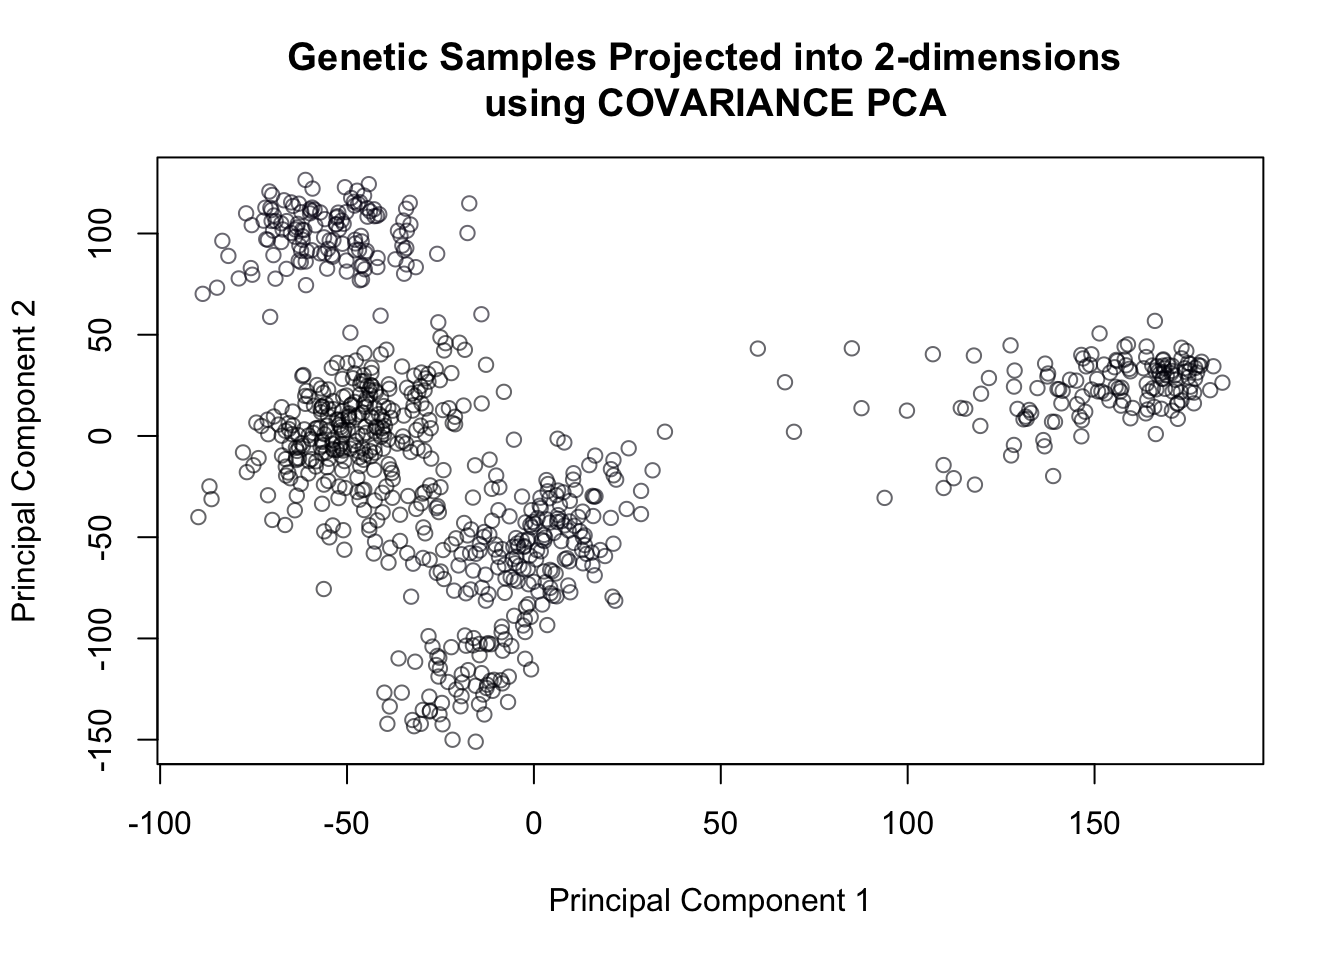 Covariance PCA of genetic data